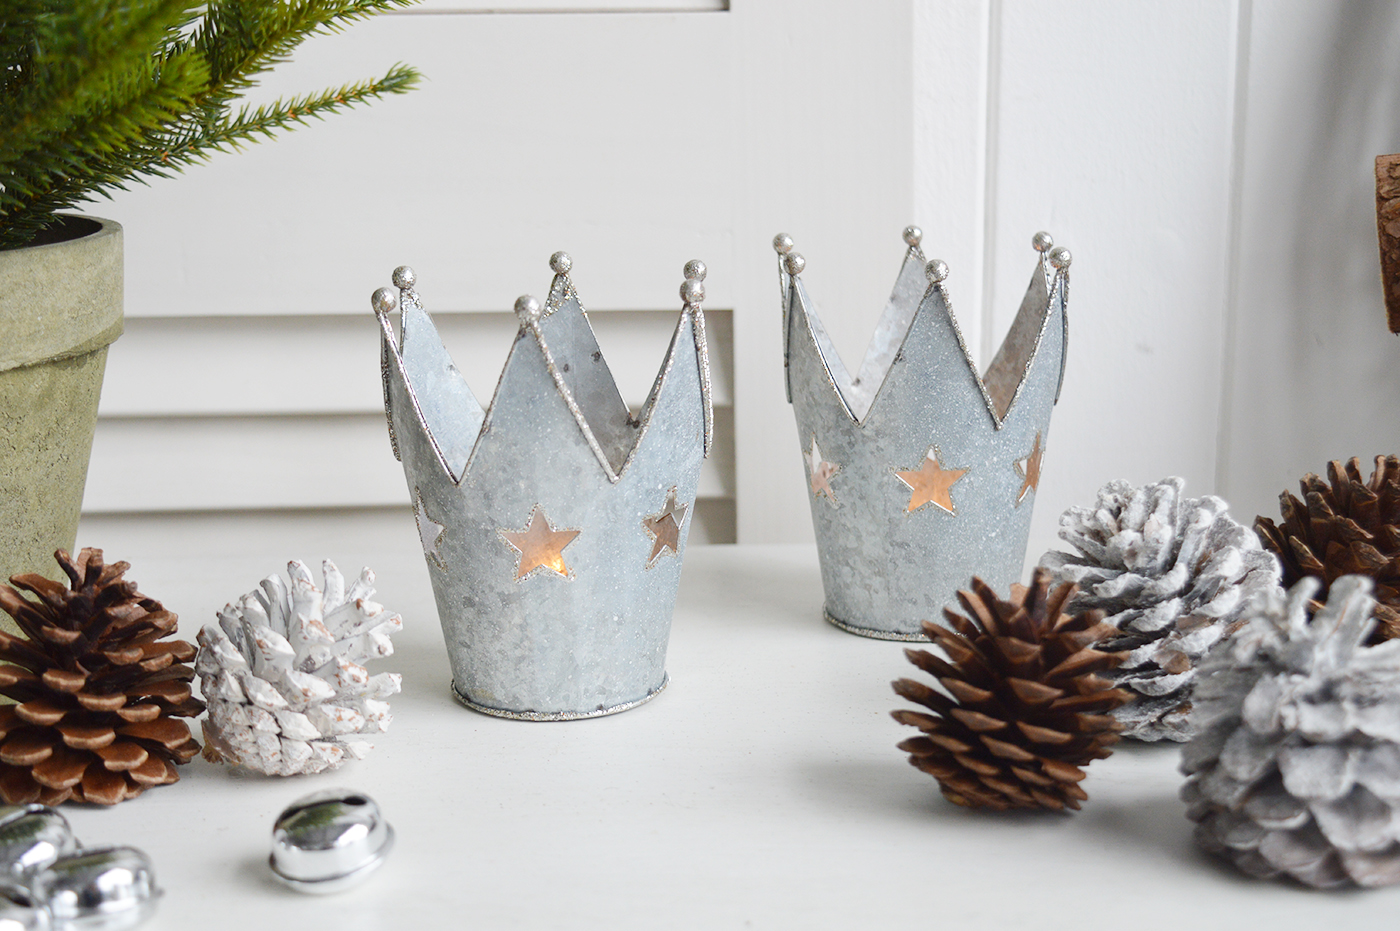 Crown Tea Light Holder with Stars from The White Lighthouse furniture and accessories. New England, coastal, country, city and farmhouse home interiors and decor